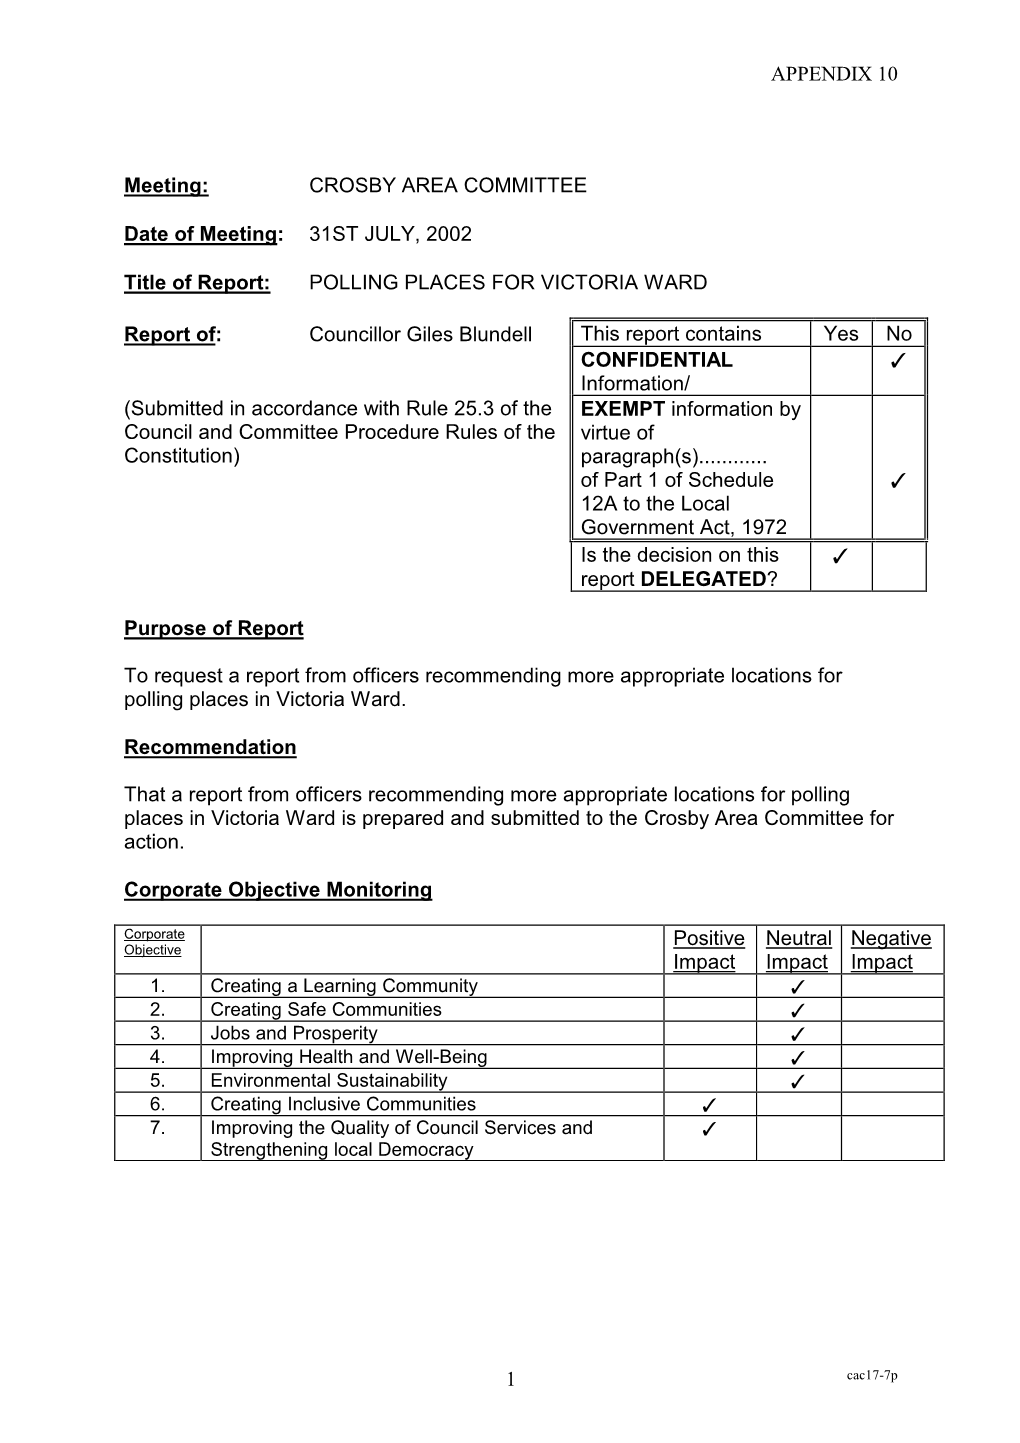 APPENDIX 10 1 Meeting: CROSBY AREA COMMITTEE Date of Meeting: 31ST JULY, 2002 Title of Report: POLLING PLACES for VICTORIA WARD